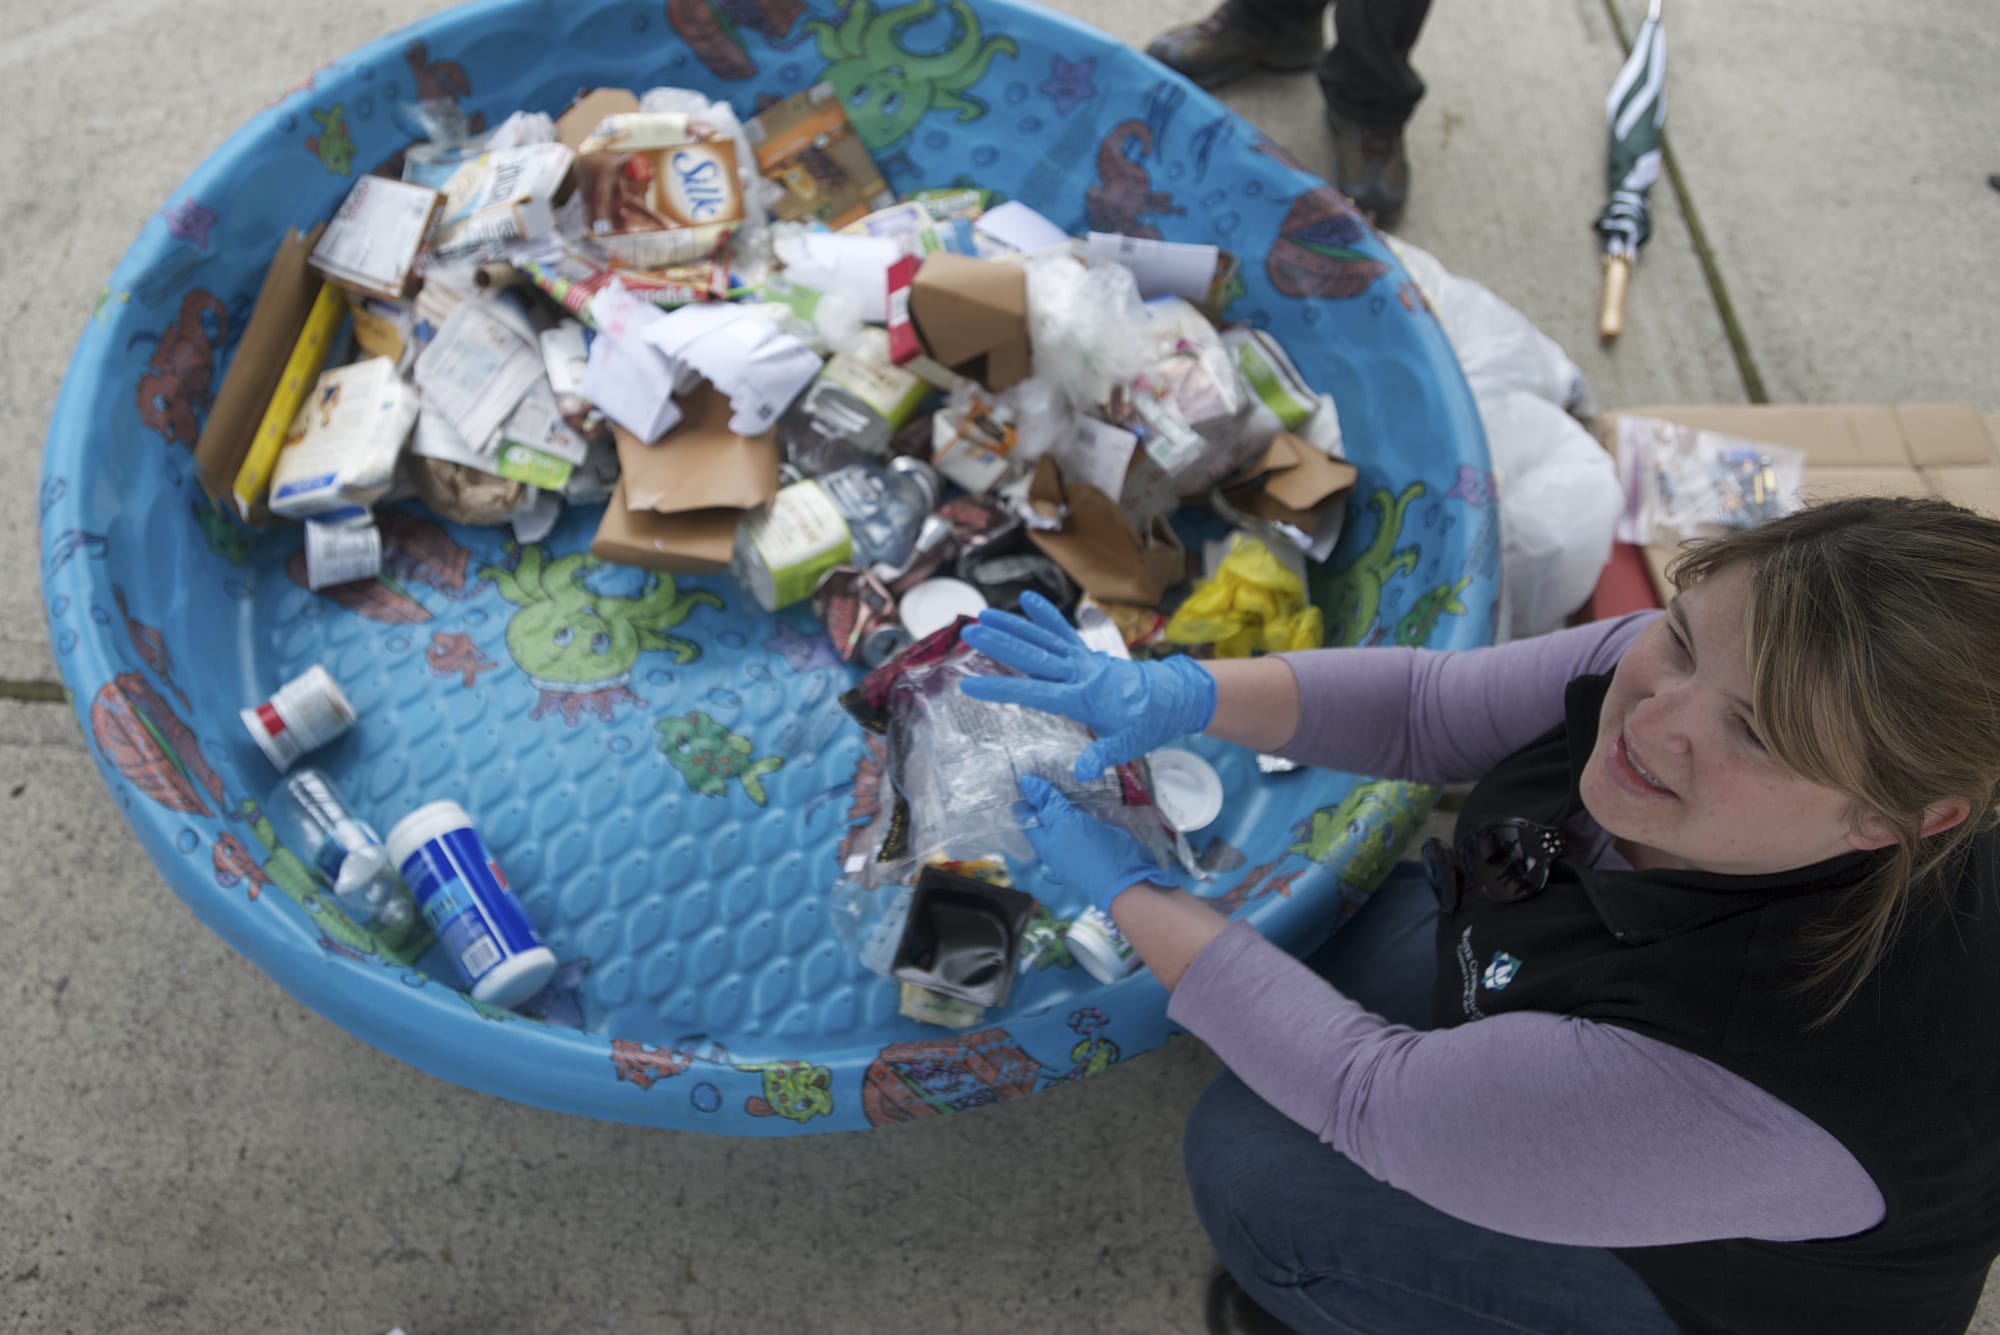 Terra Heilman, waste-reduction specialist with Waste Connections, explains which items are recyclable as she picks through the contents of a family's recycling bin Wednesday at the home of Tracy Davis.